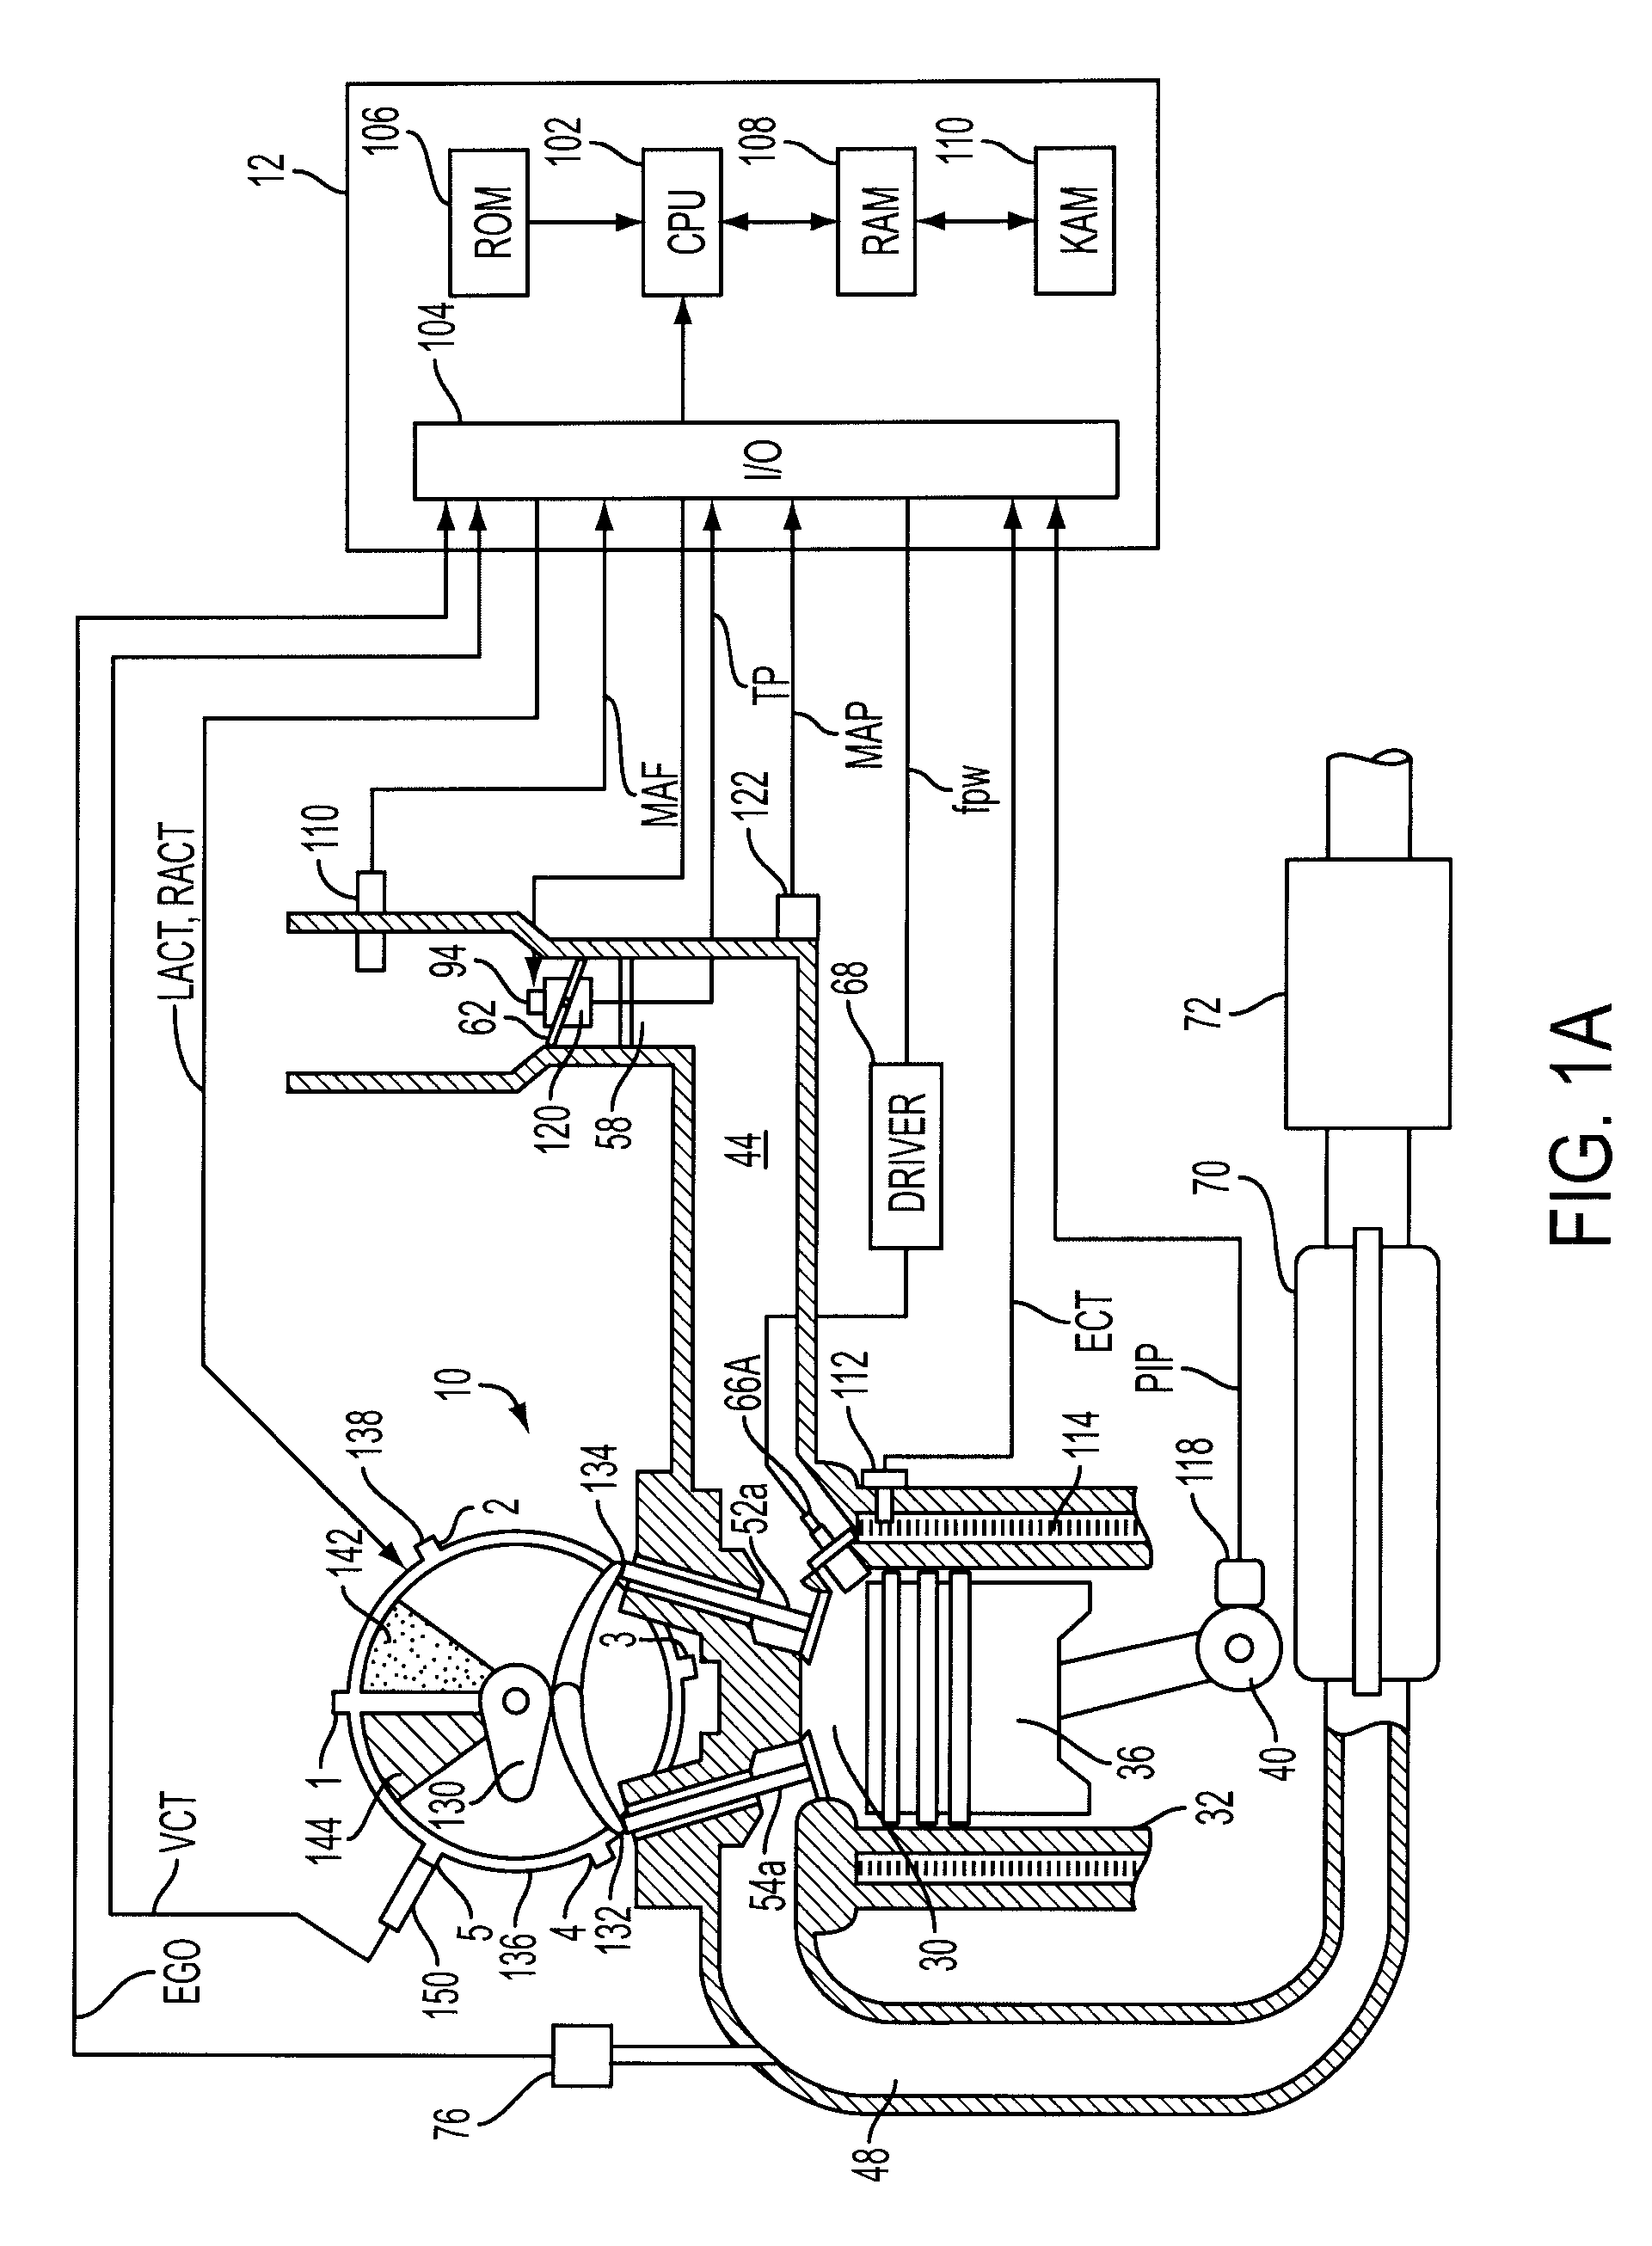 Diesel engine with differential cylinder group operation